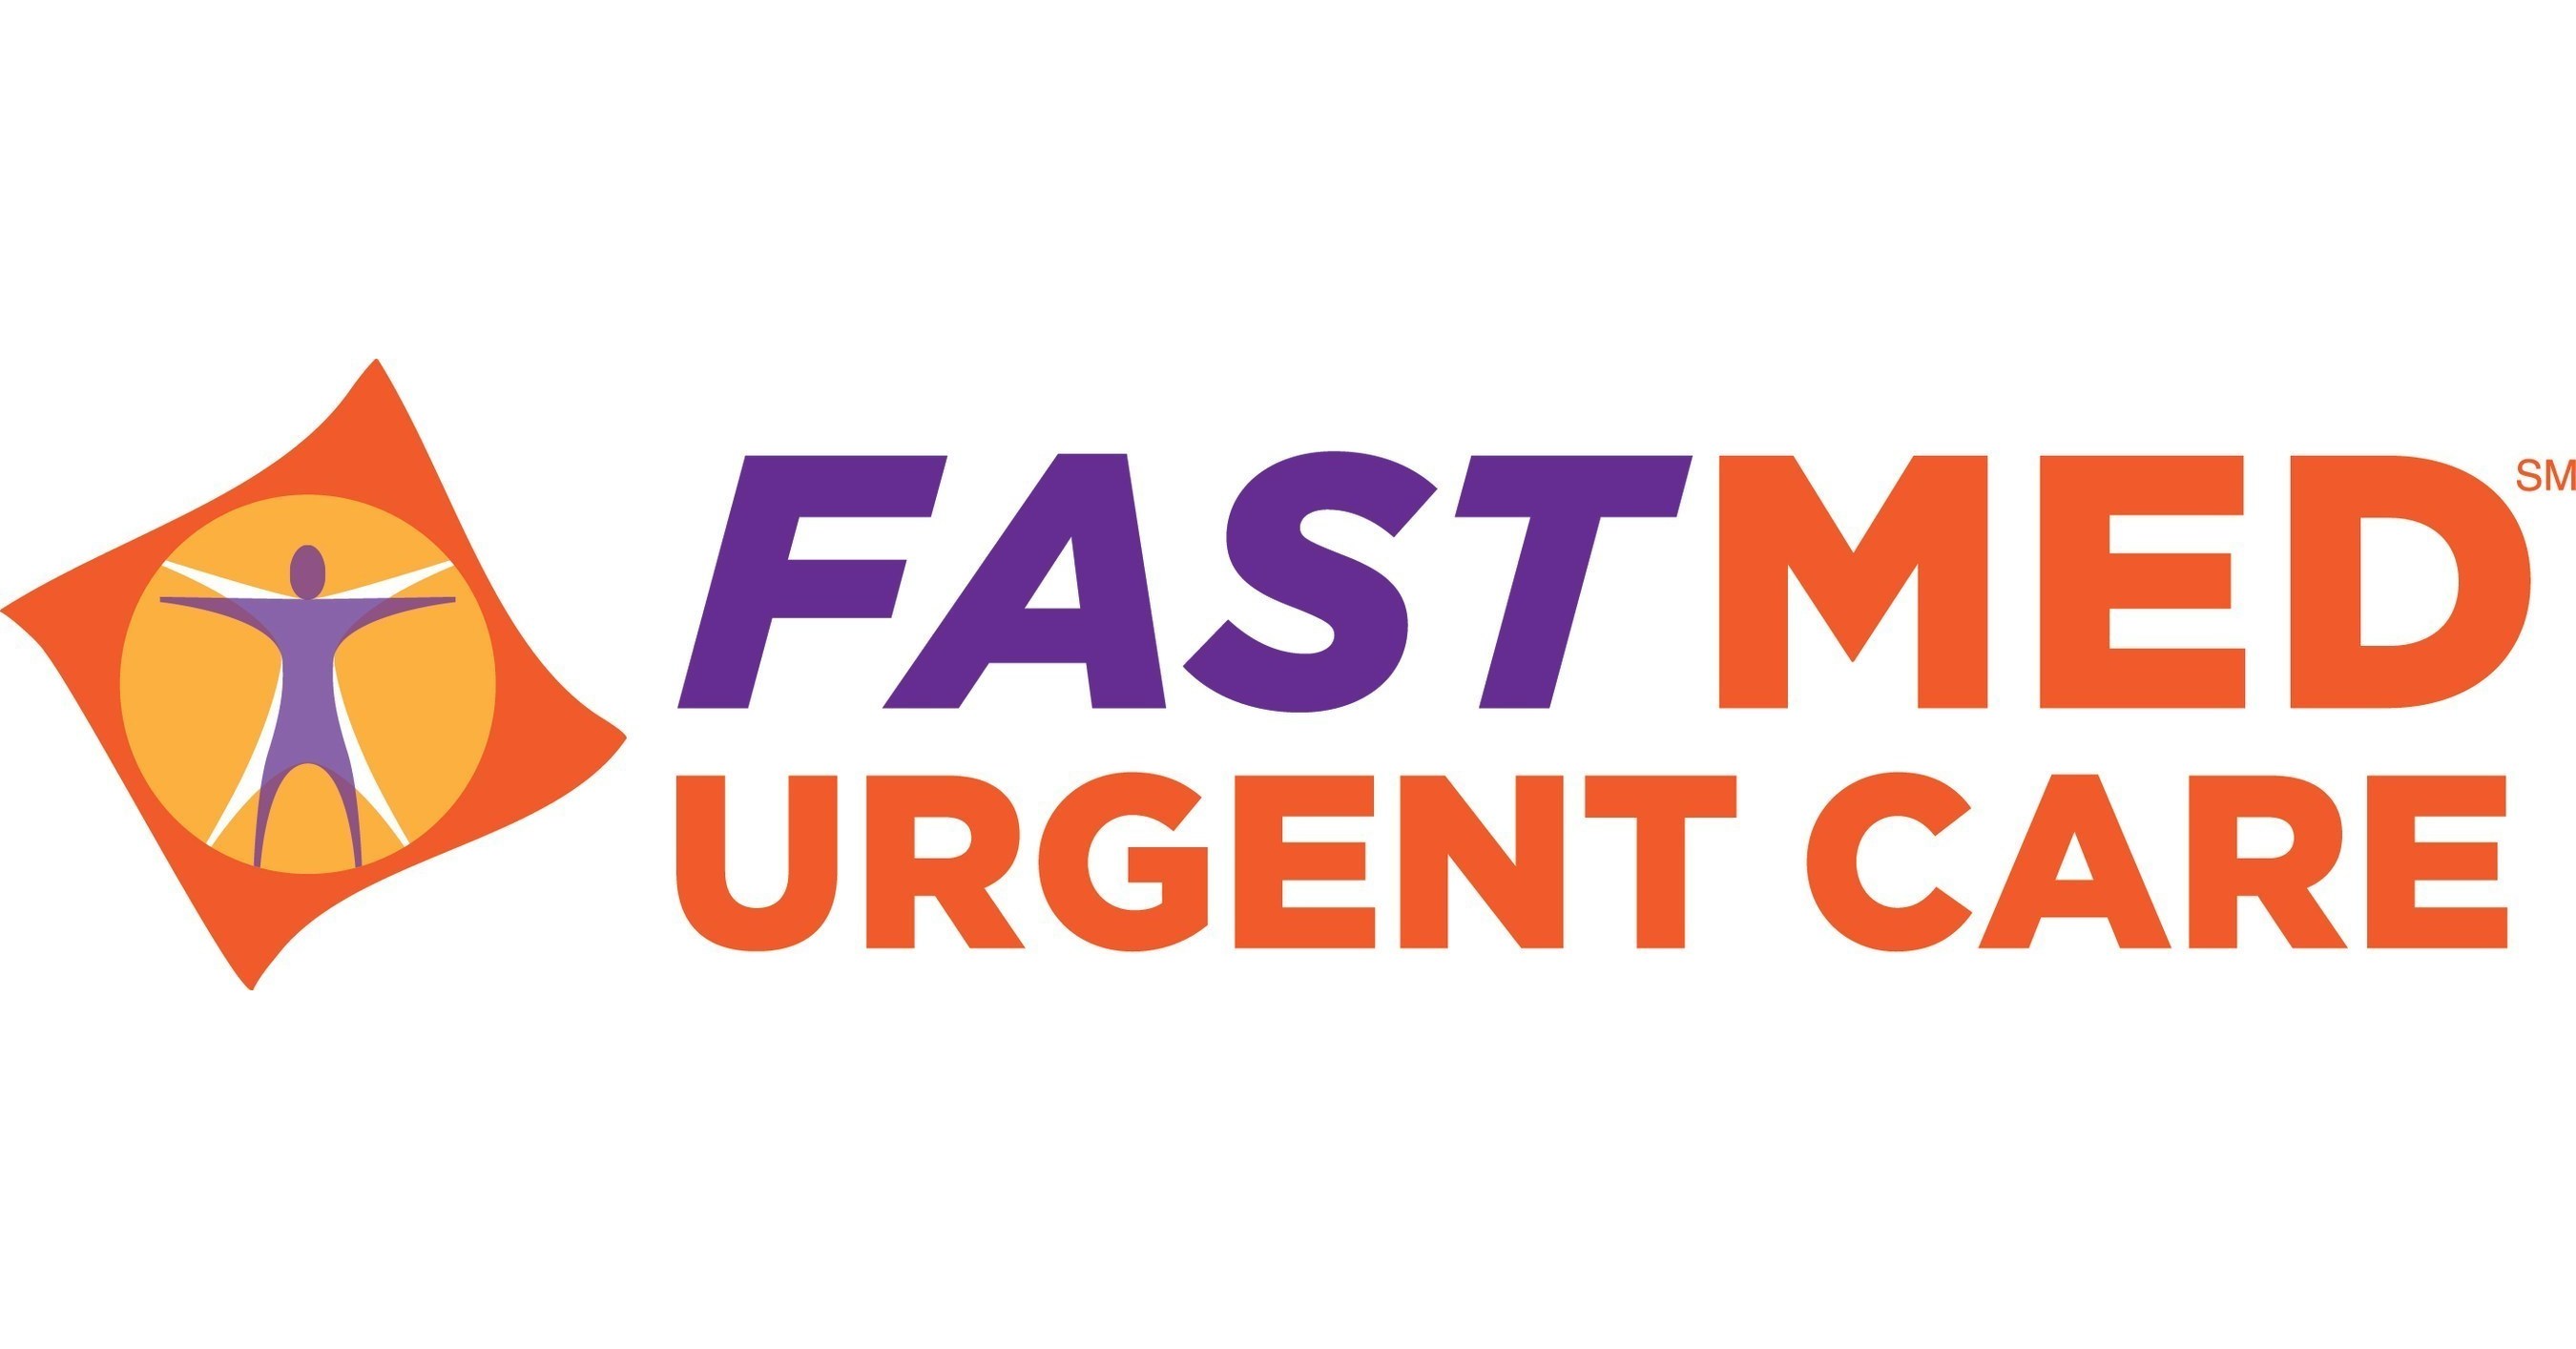 Fastmed Urgent Care Appoints New Ceo